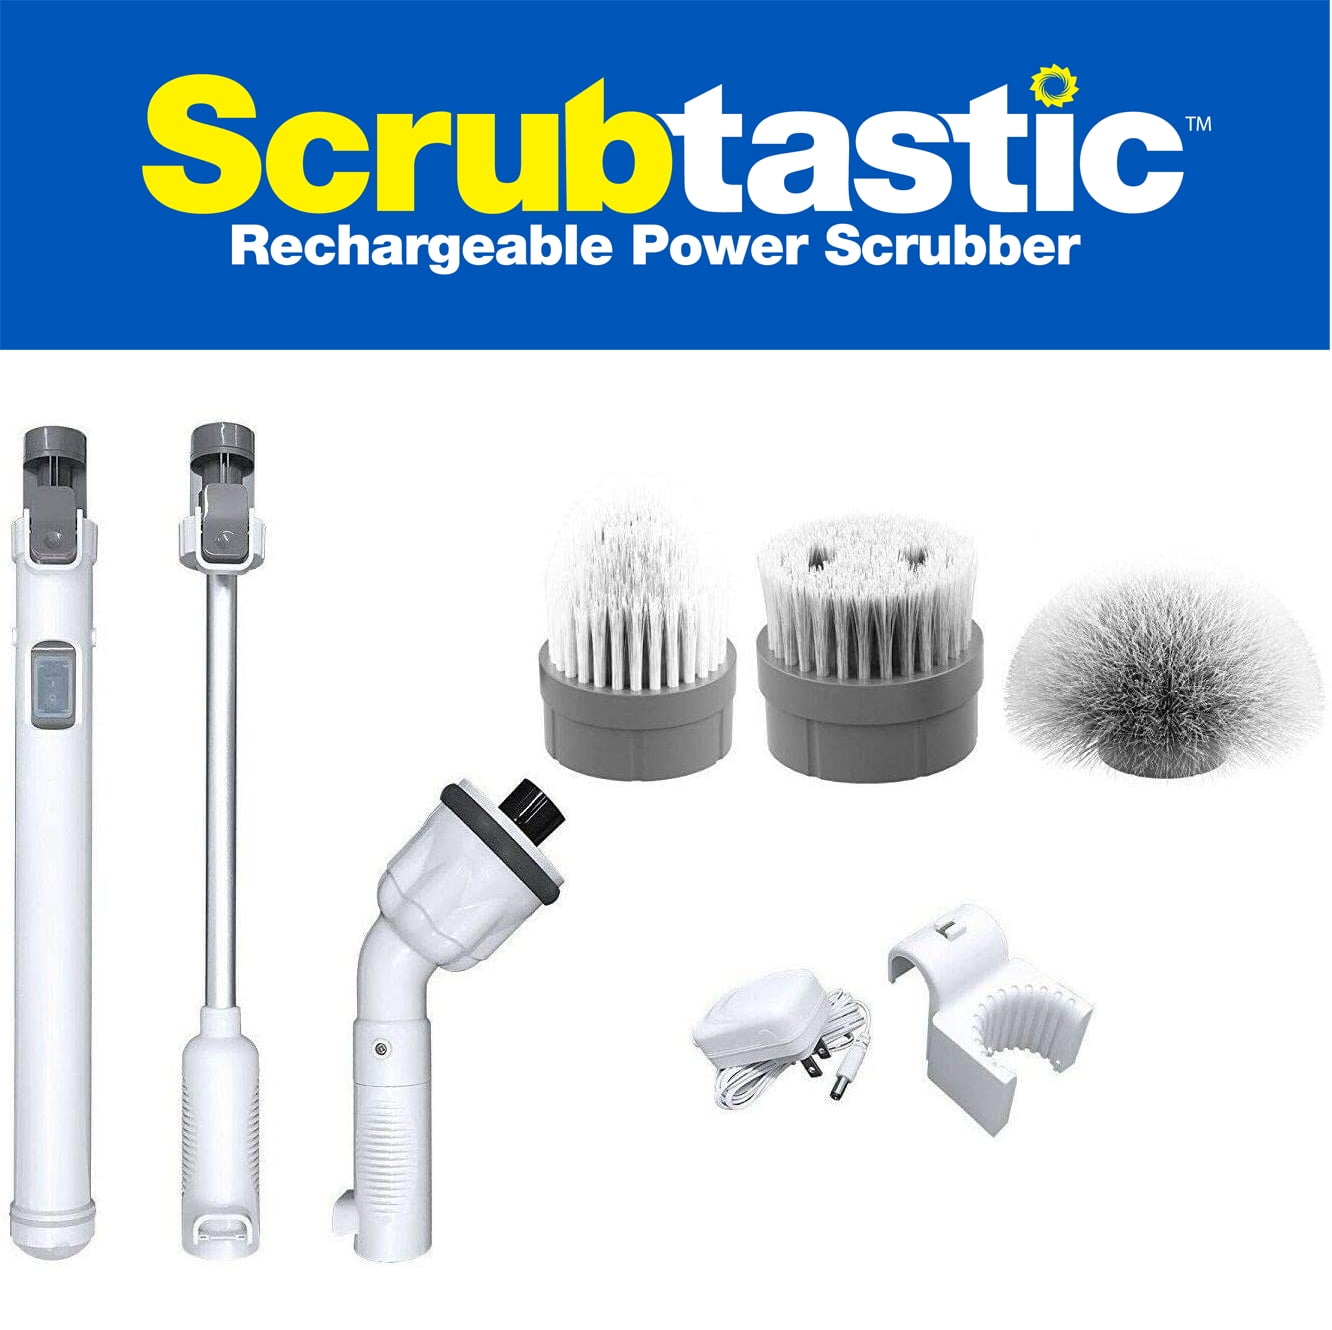 New Clorox Scrubtastic Power Scrubber 3 Brush Heads Cordless & Rechargeable